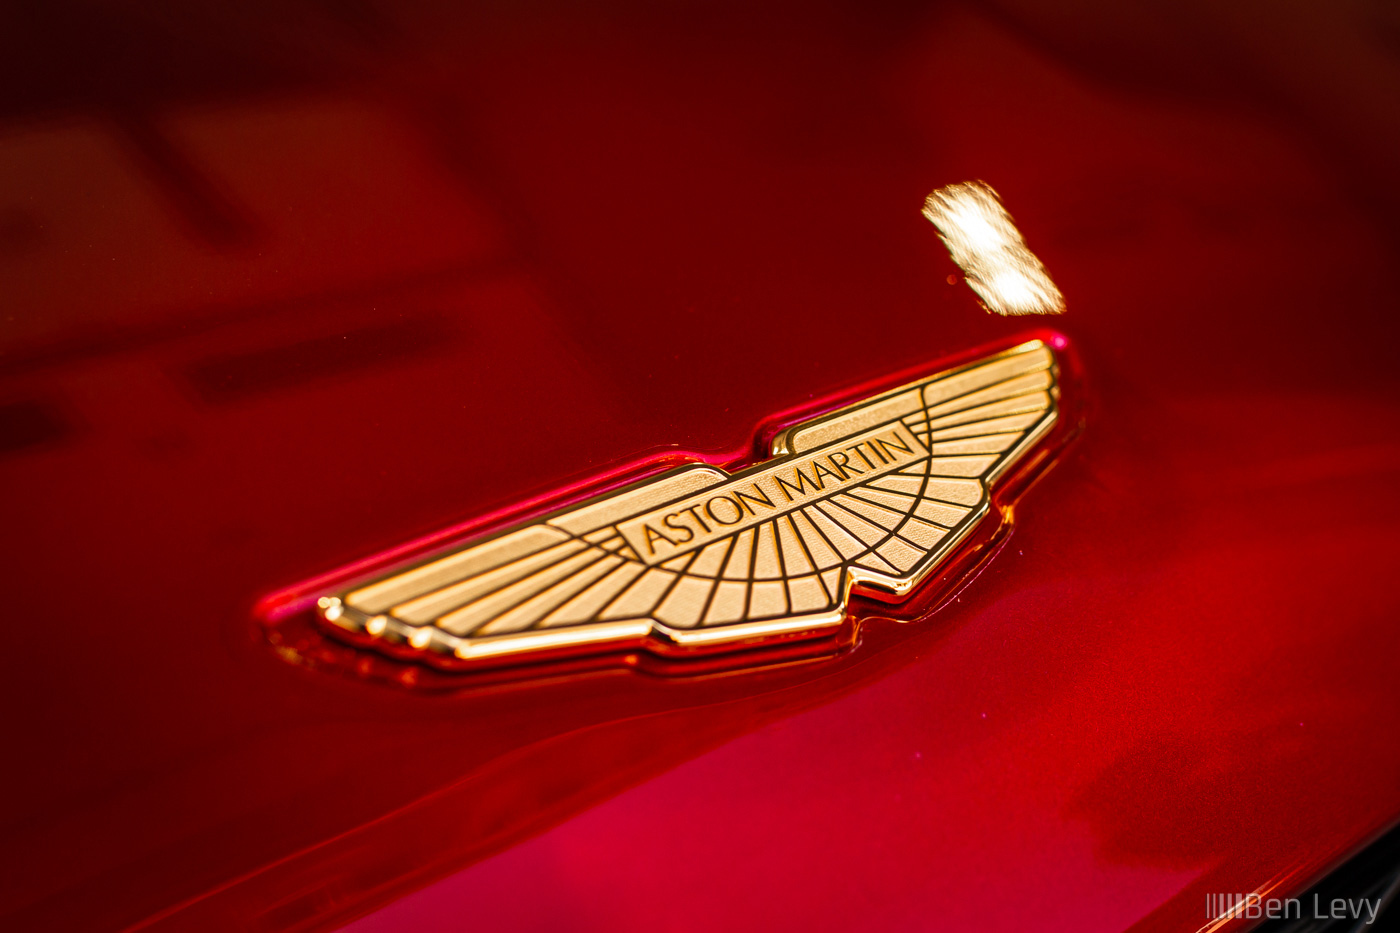 Gold Emblem on the front of an Aston Martin Vanquish Zagato